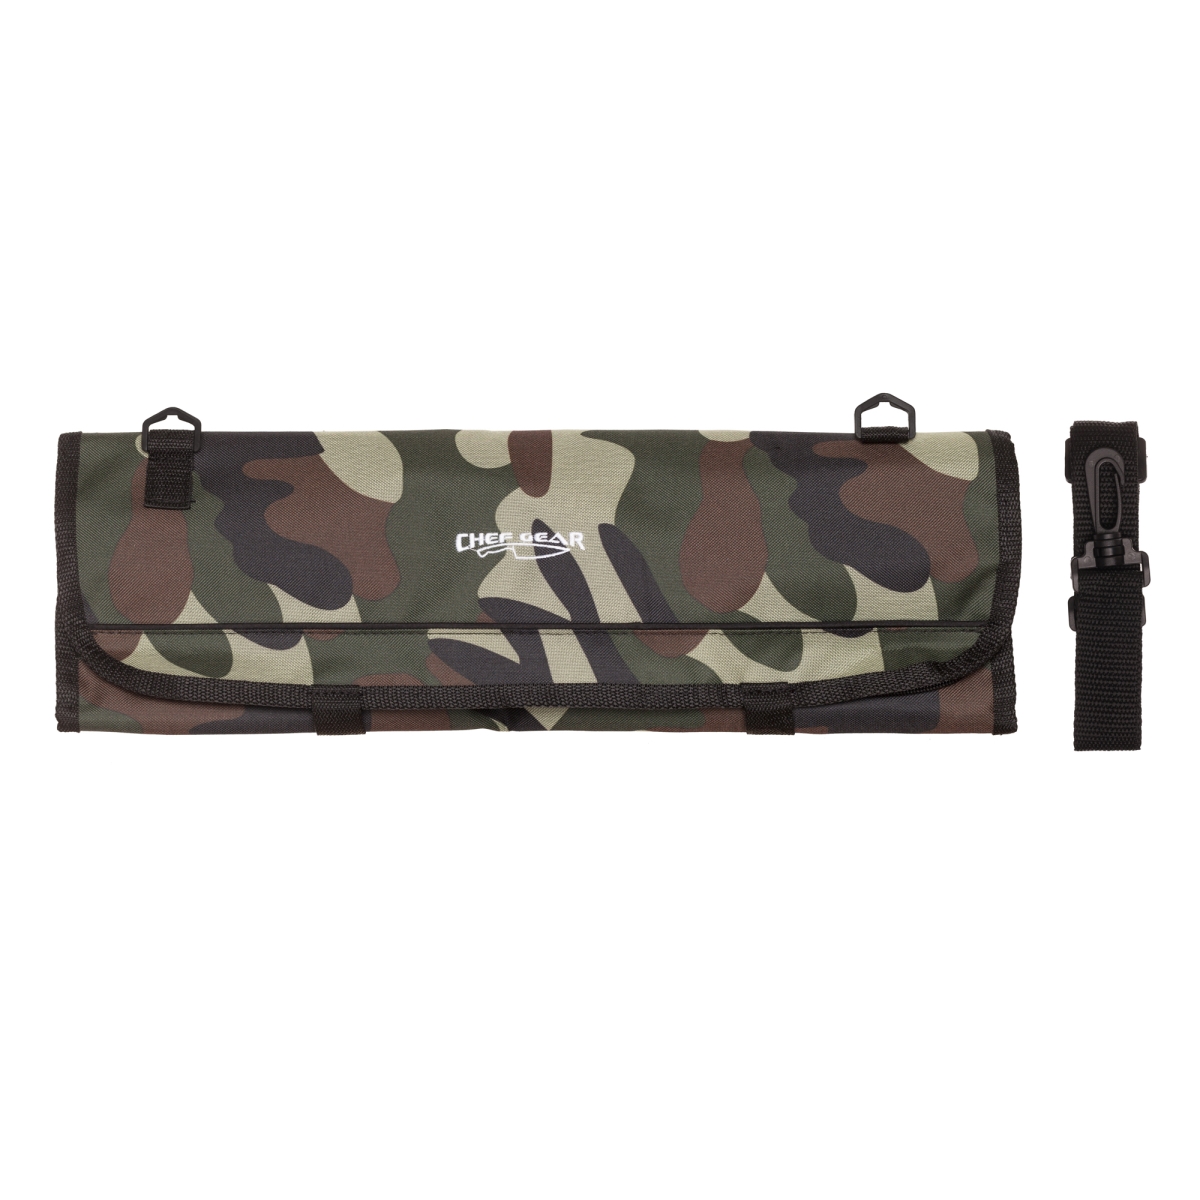 Picture of Ergo Chef 1009C 9 Pocket Chef Gear Knife Roll Bag - Camo